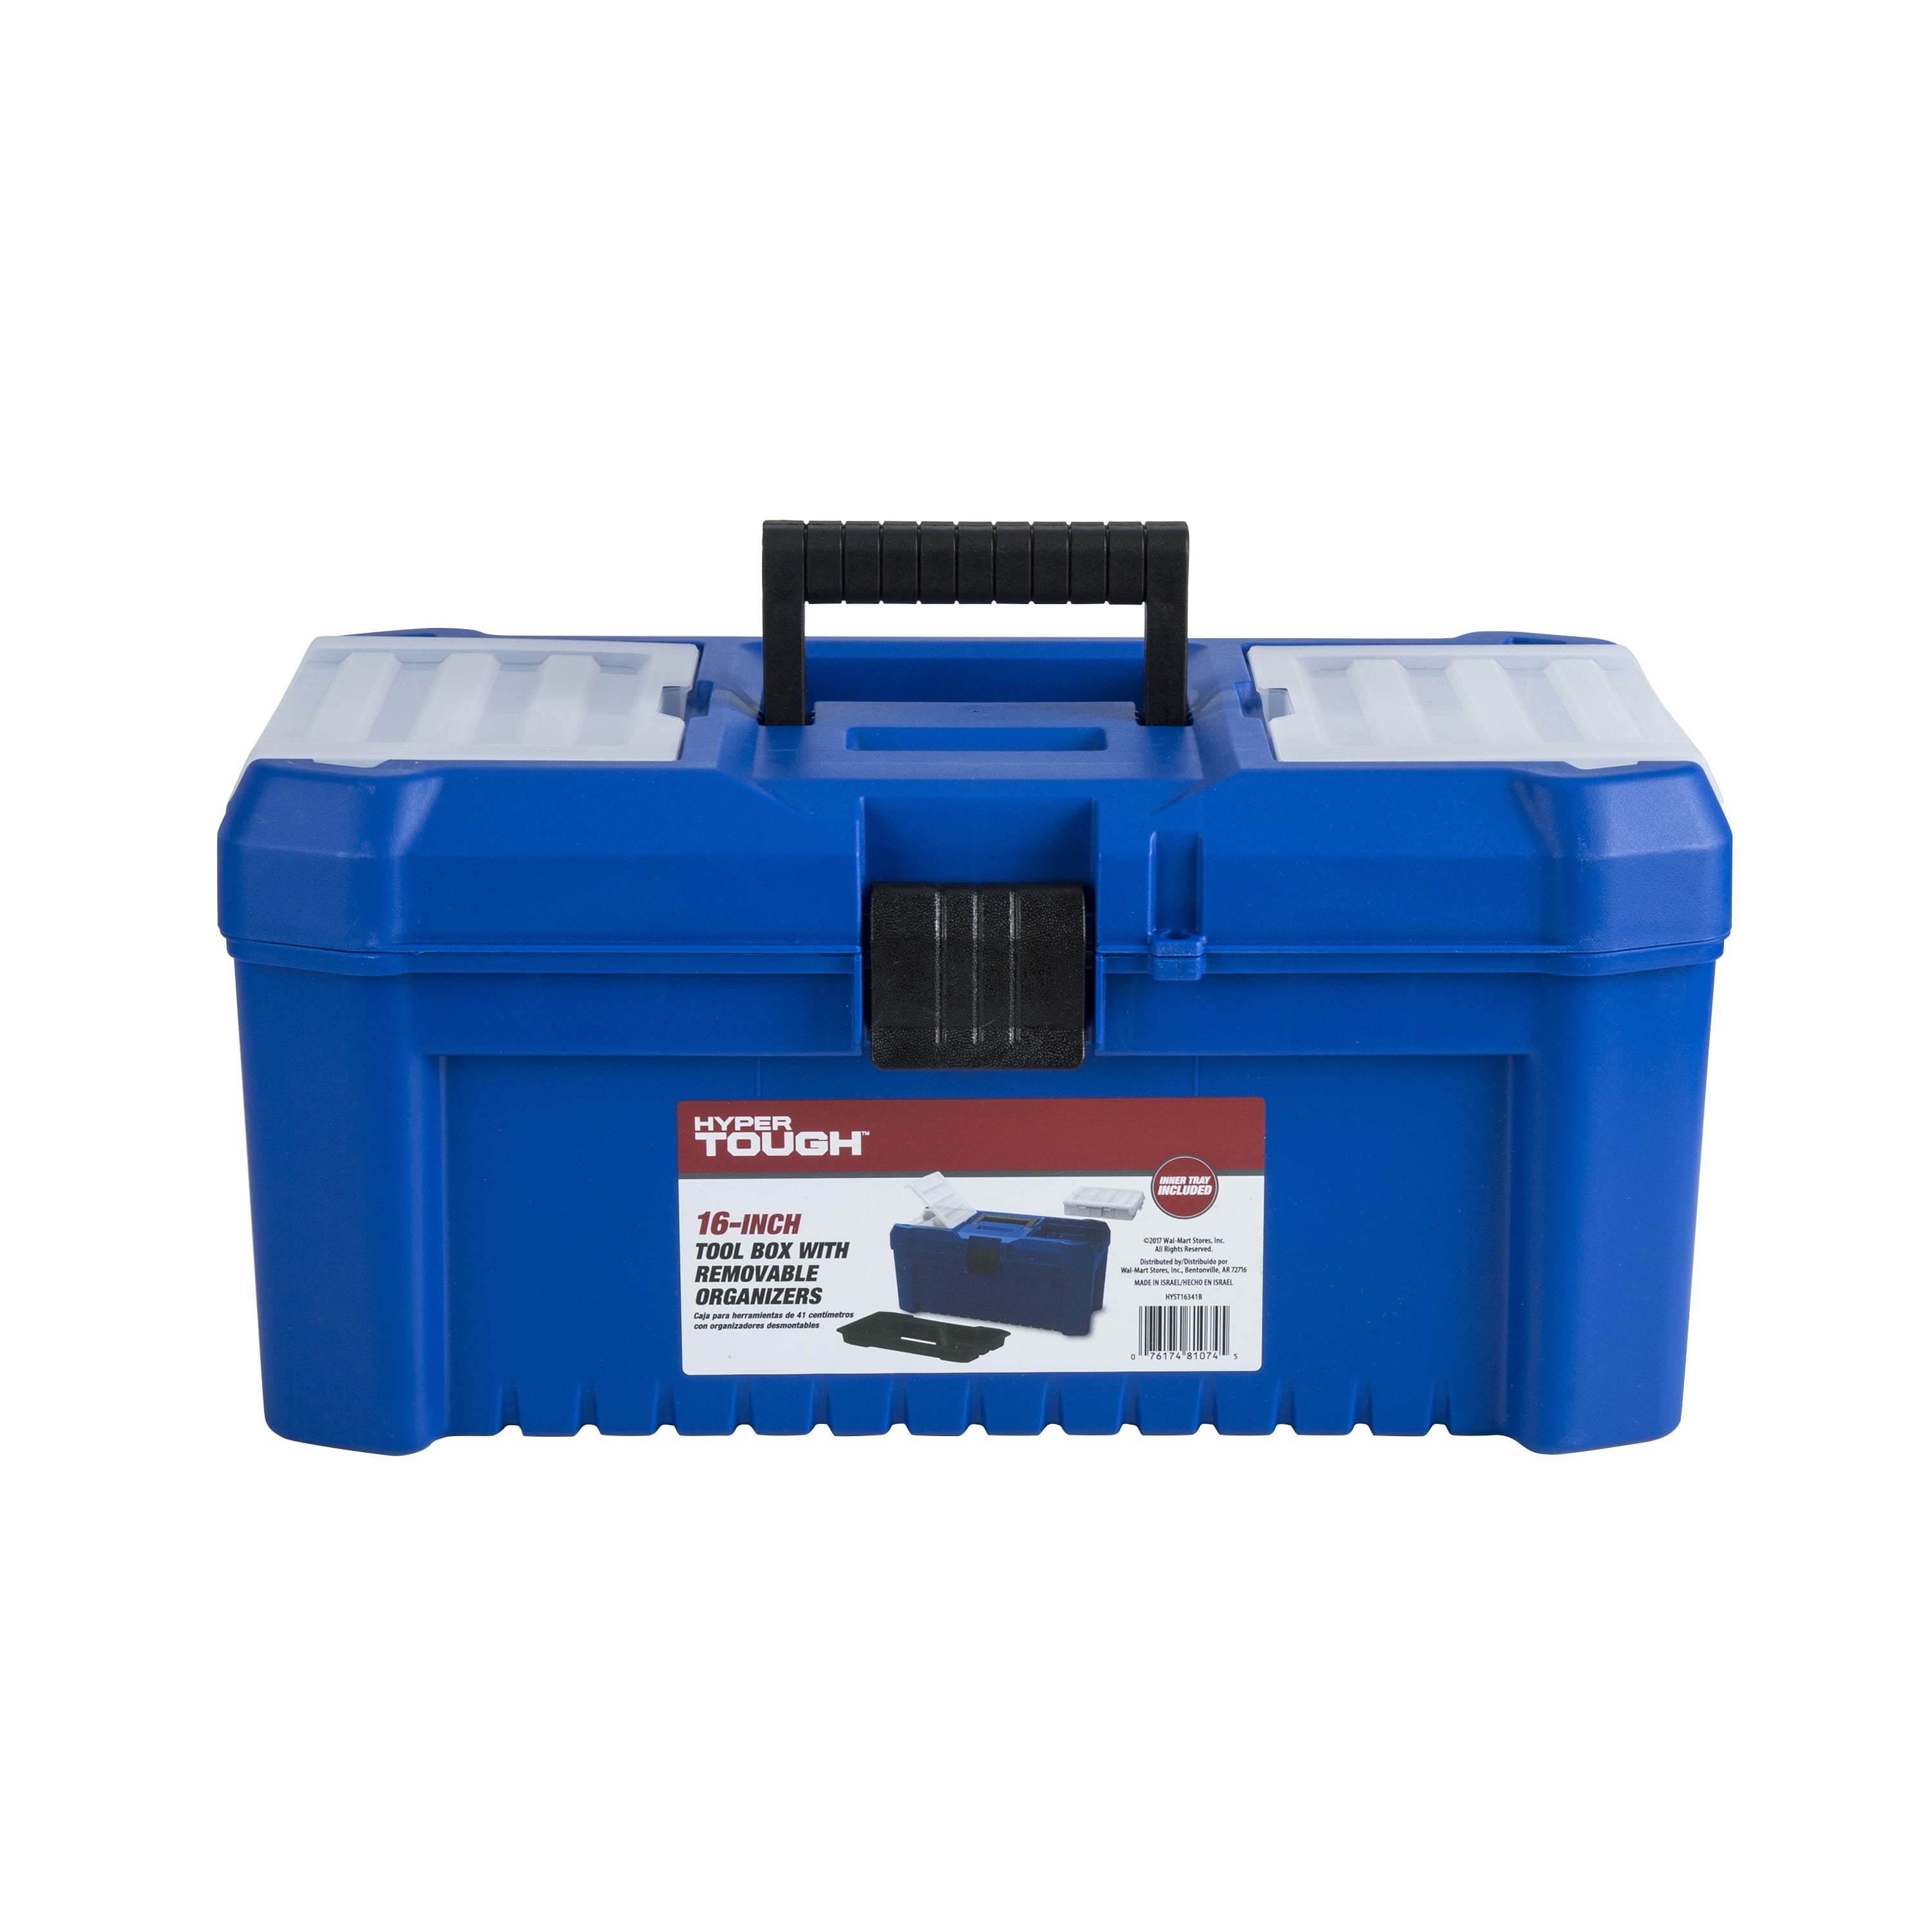 Hyper Tough 16-inch Toolbox, Plastic Tool and Hardware Storage